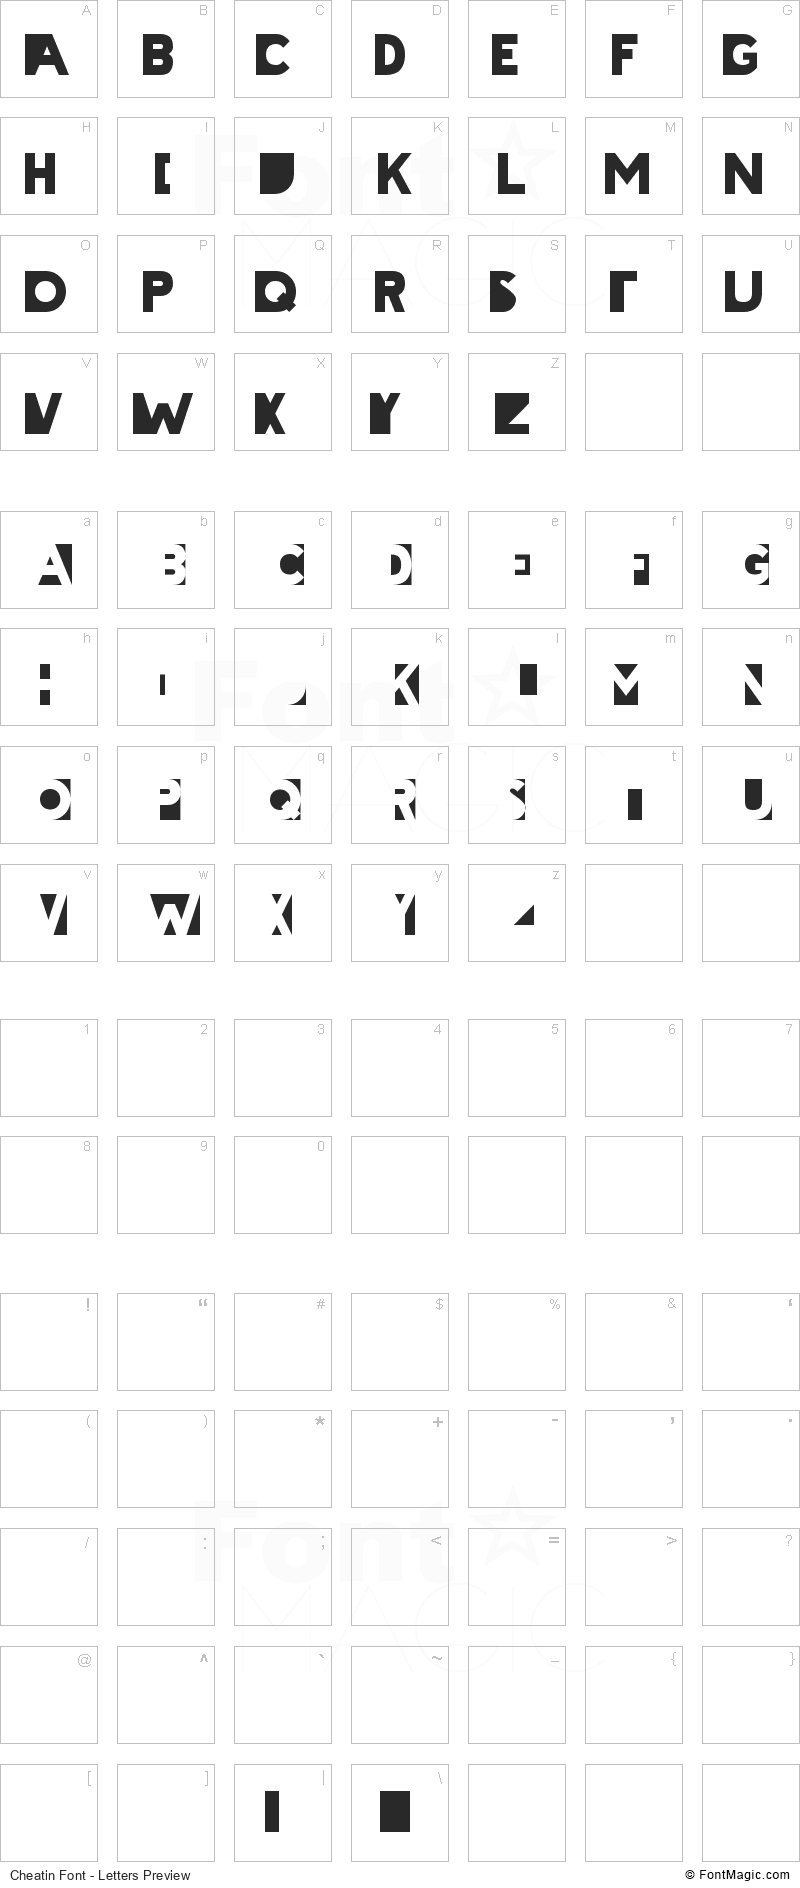 Cheatin Font - All Latters Preview Chart